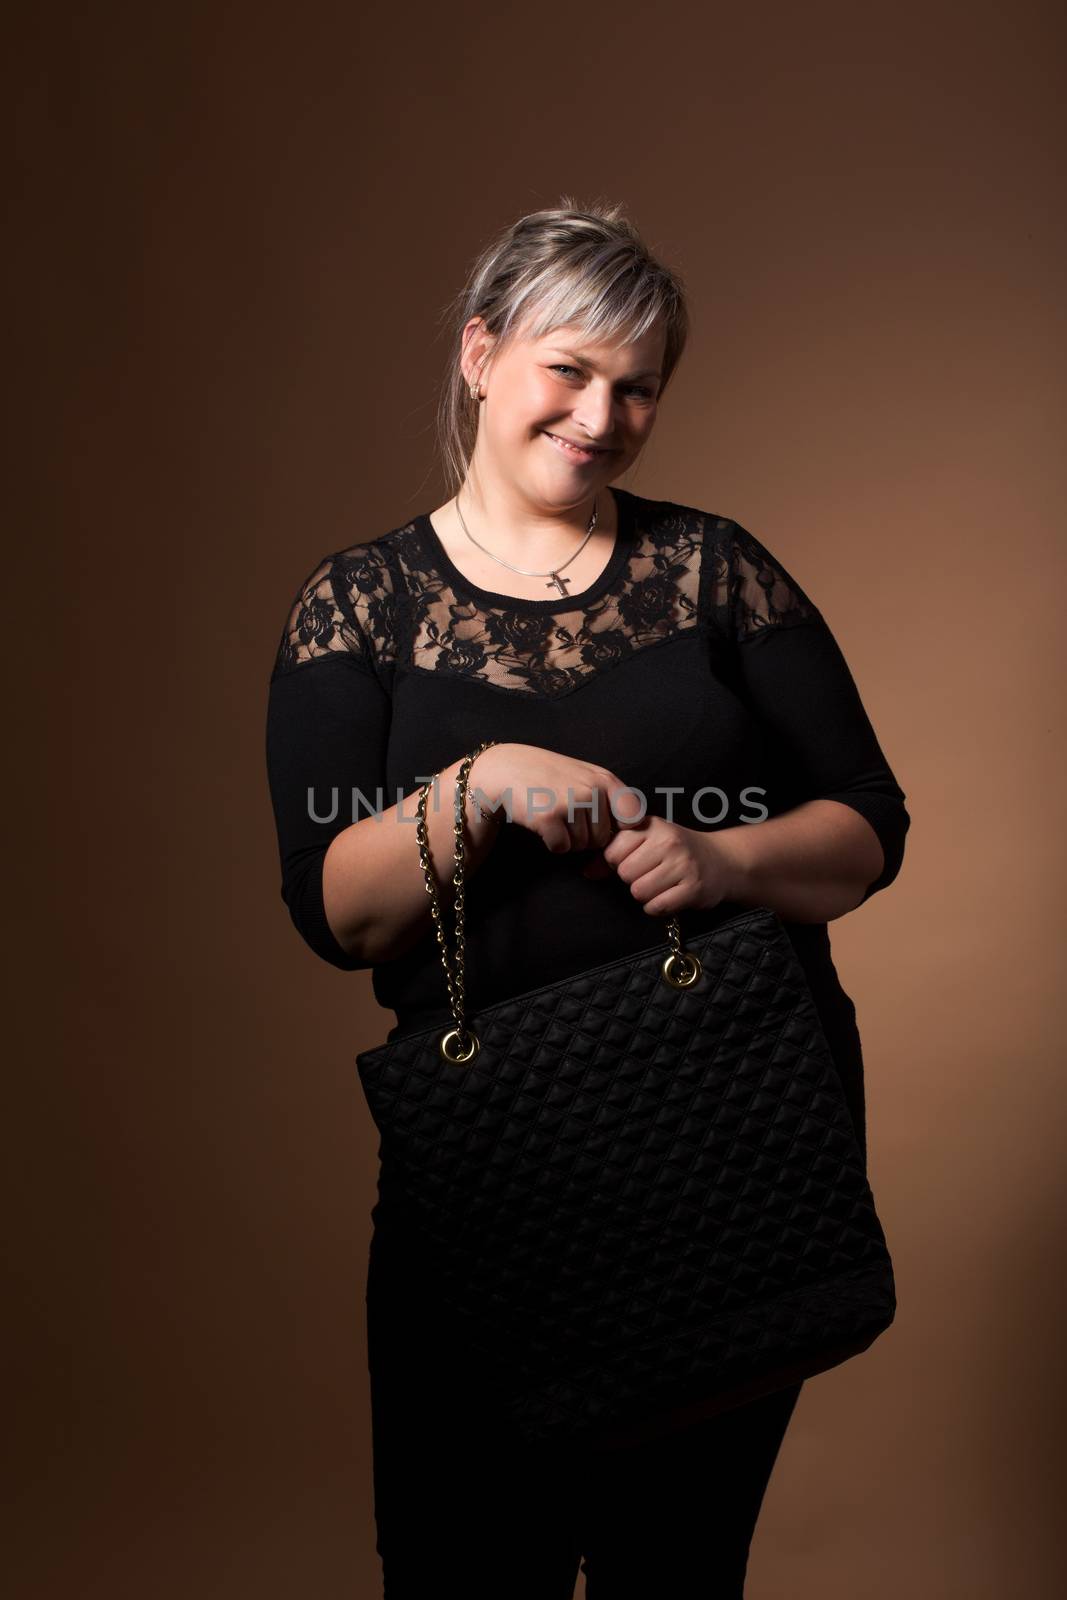 portrait of beautiful smiling plus size young blond woman posing with designer handbags and black dress